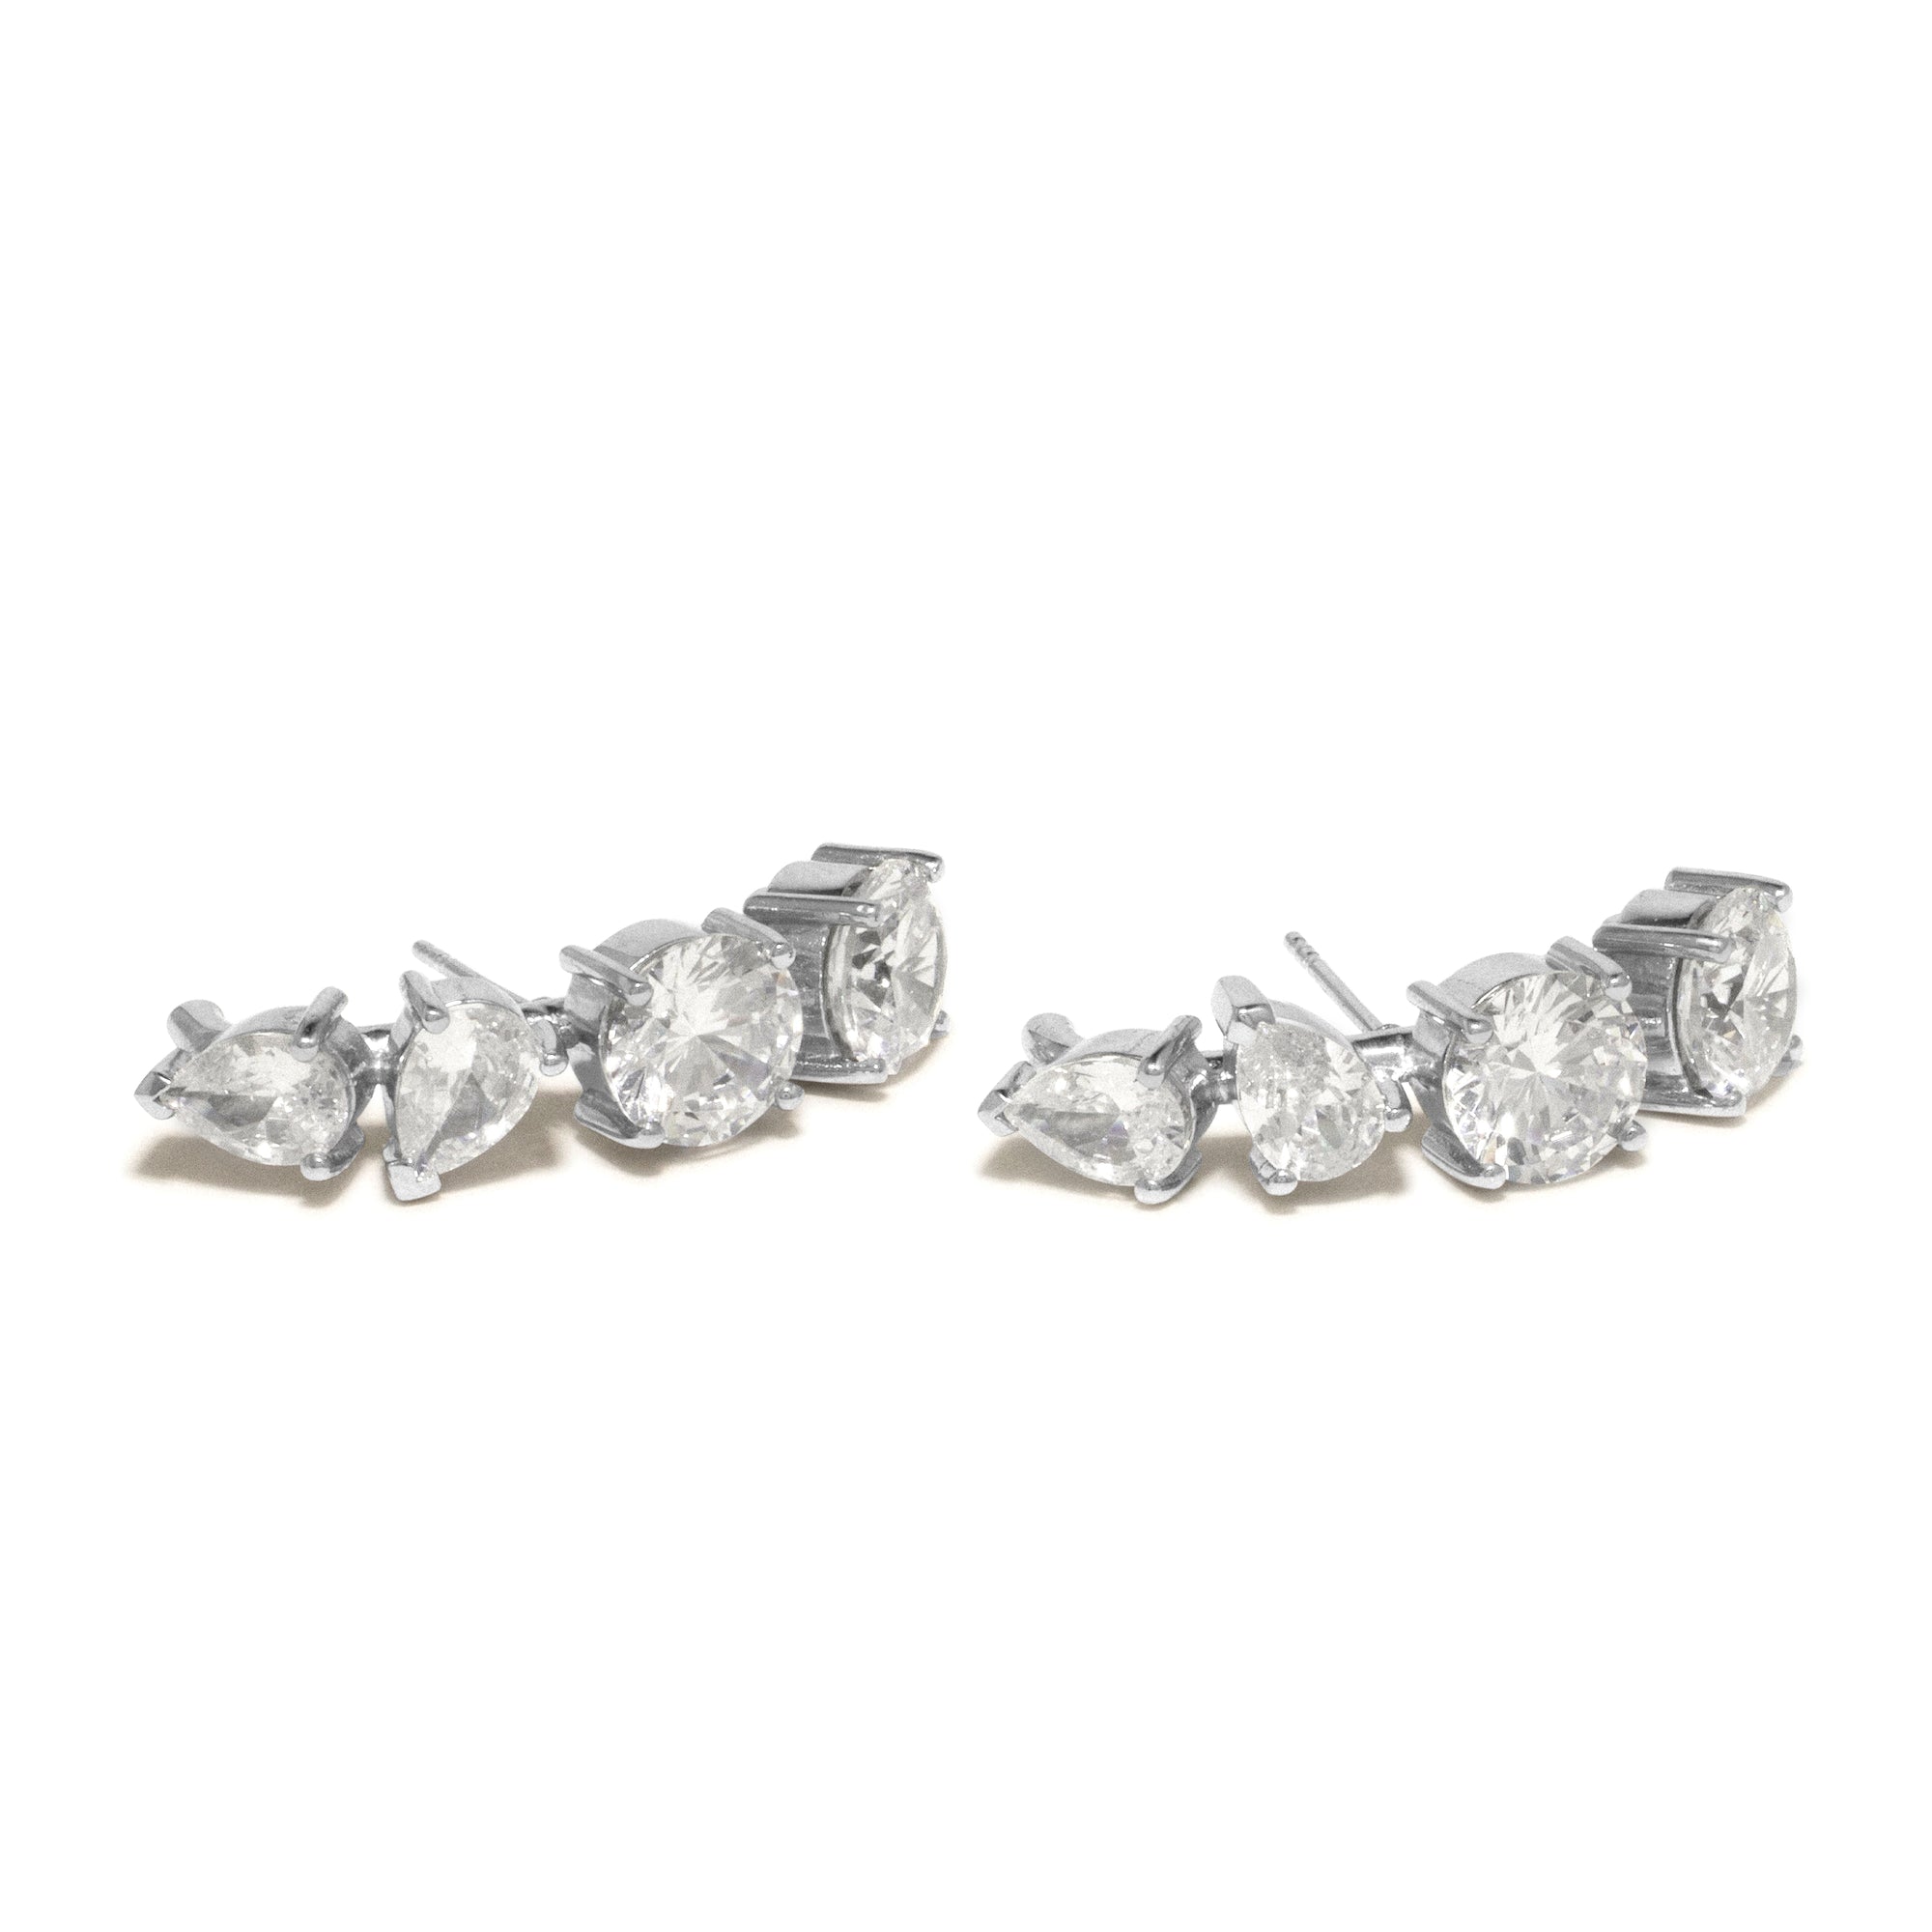 Completedworks - Ear Climber Earrings - (Silver) view 2